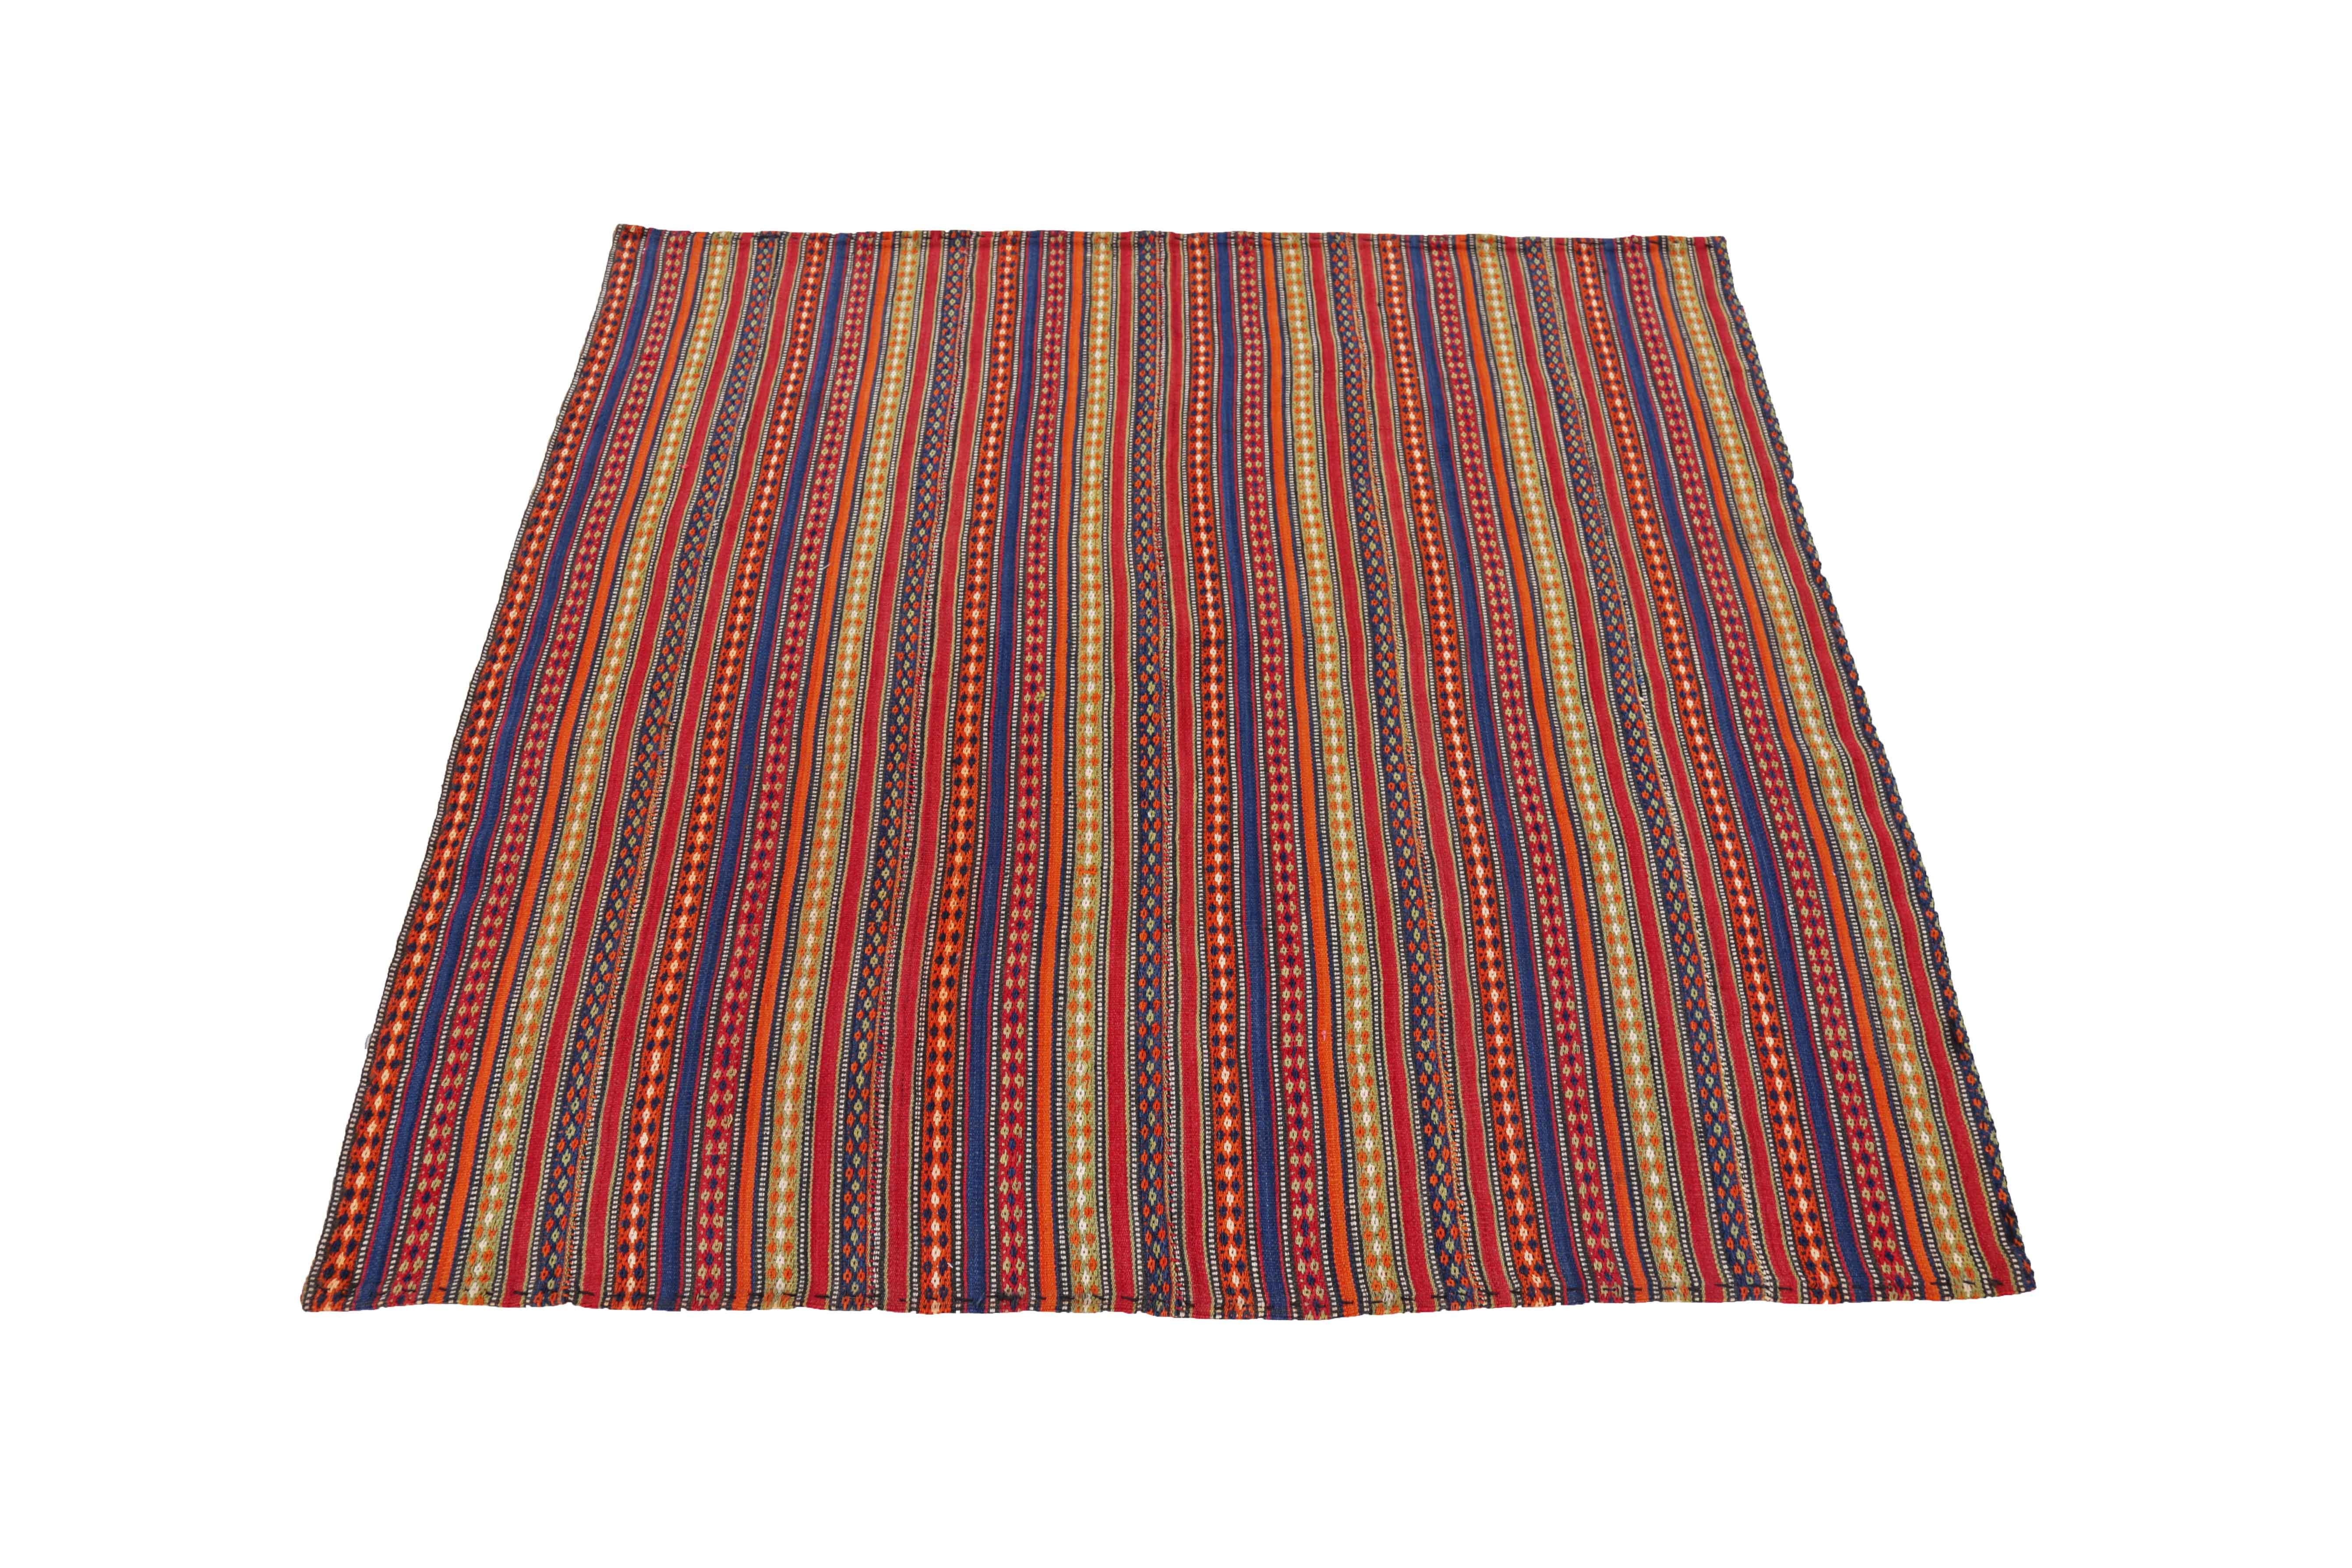 Antique Persian square rug handwoven from the finest sheep’s wool. It’s colored with all-natural vegetable dyes that are safe for humans and pets. It’s a traditional Jajm design handwoven by expert artisans. It’s a lovely square rug that can be